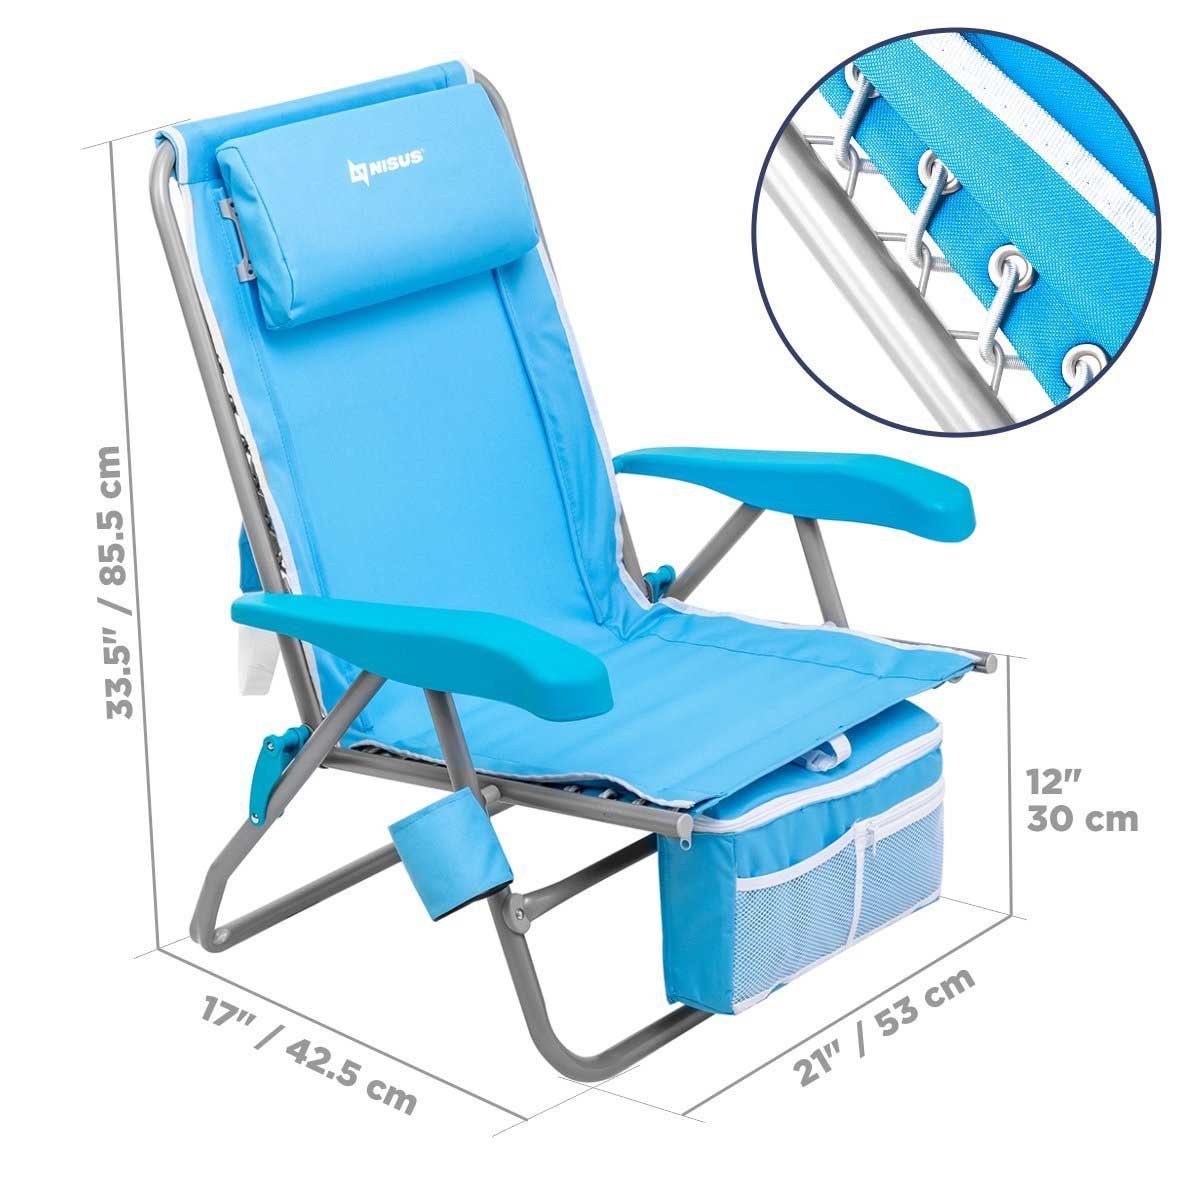 Premium Backpack Beach Chair with Cooler Bag and Headrest, Blue is 33.5 inches high, 17 inches long, 21 inches wide and 12 inches deep